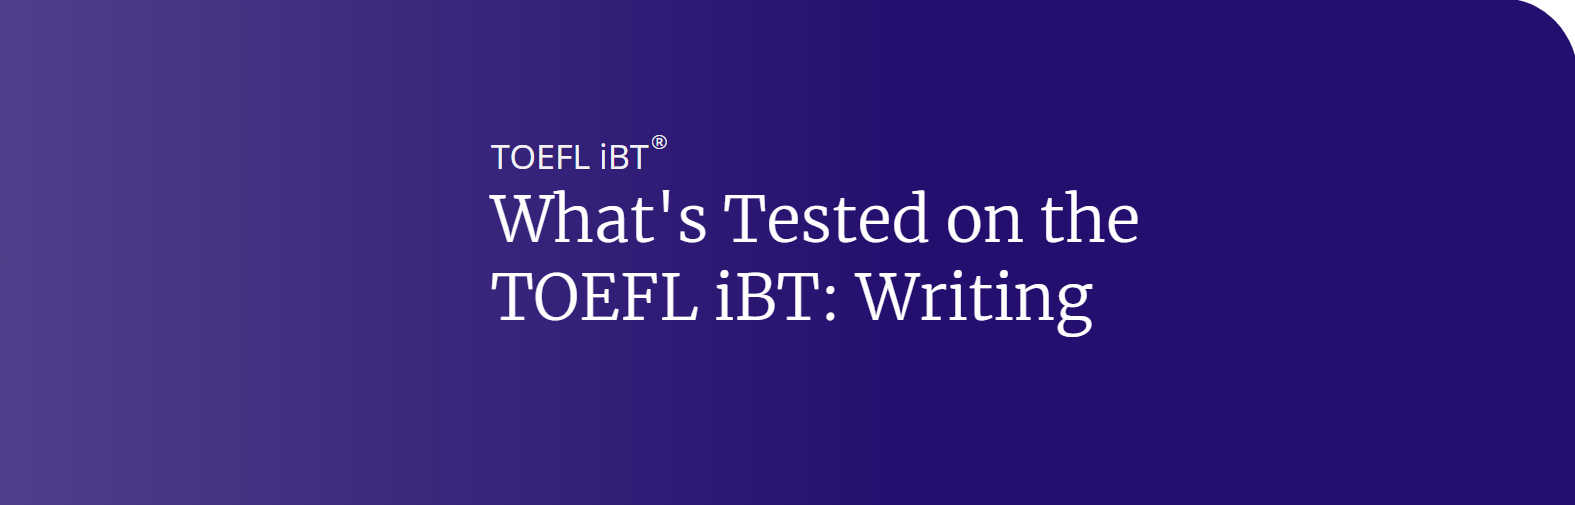 What's Tested on the TOEFL: Writing